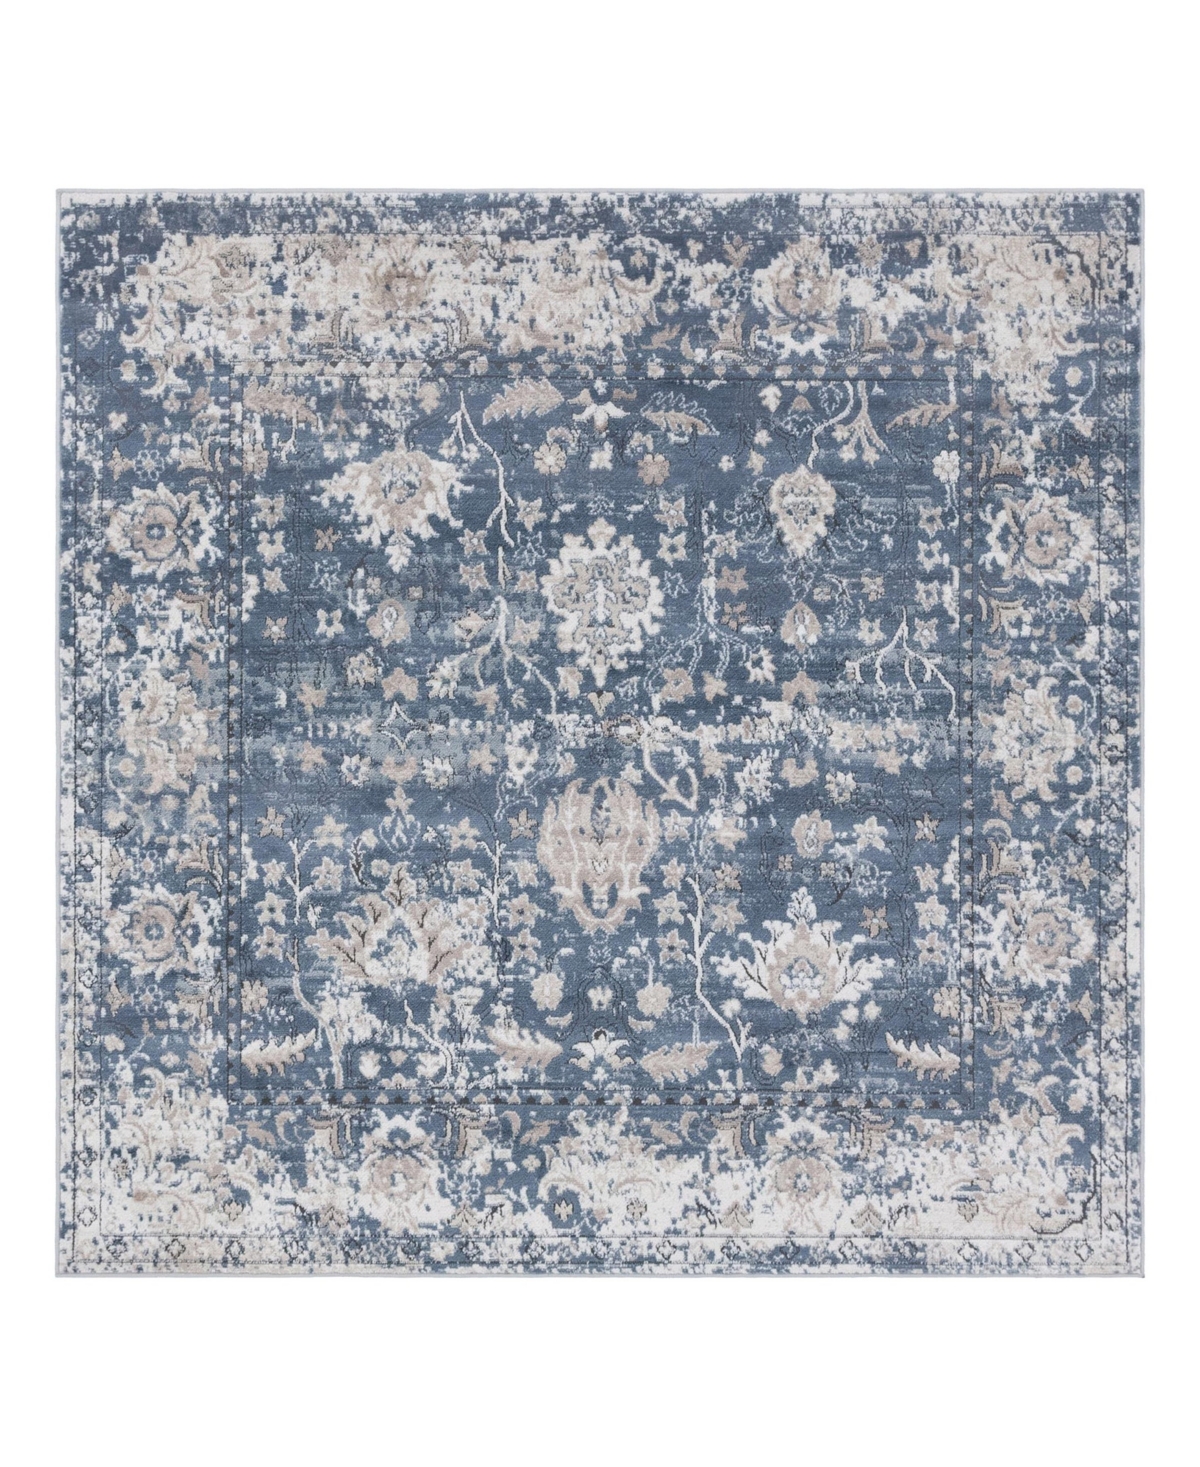 Bayshore Home Wheeler Wlr-01 6' X 6' Square Area Rug In Blue